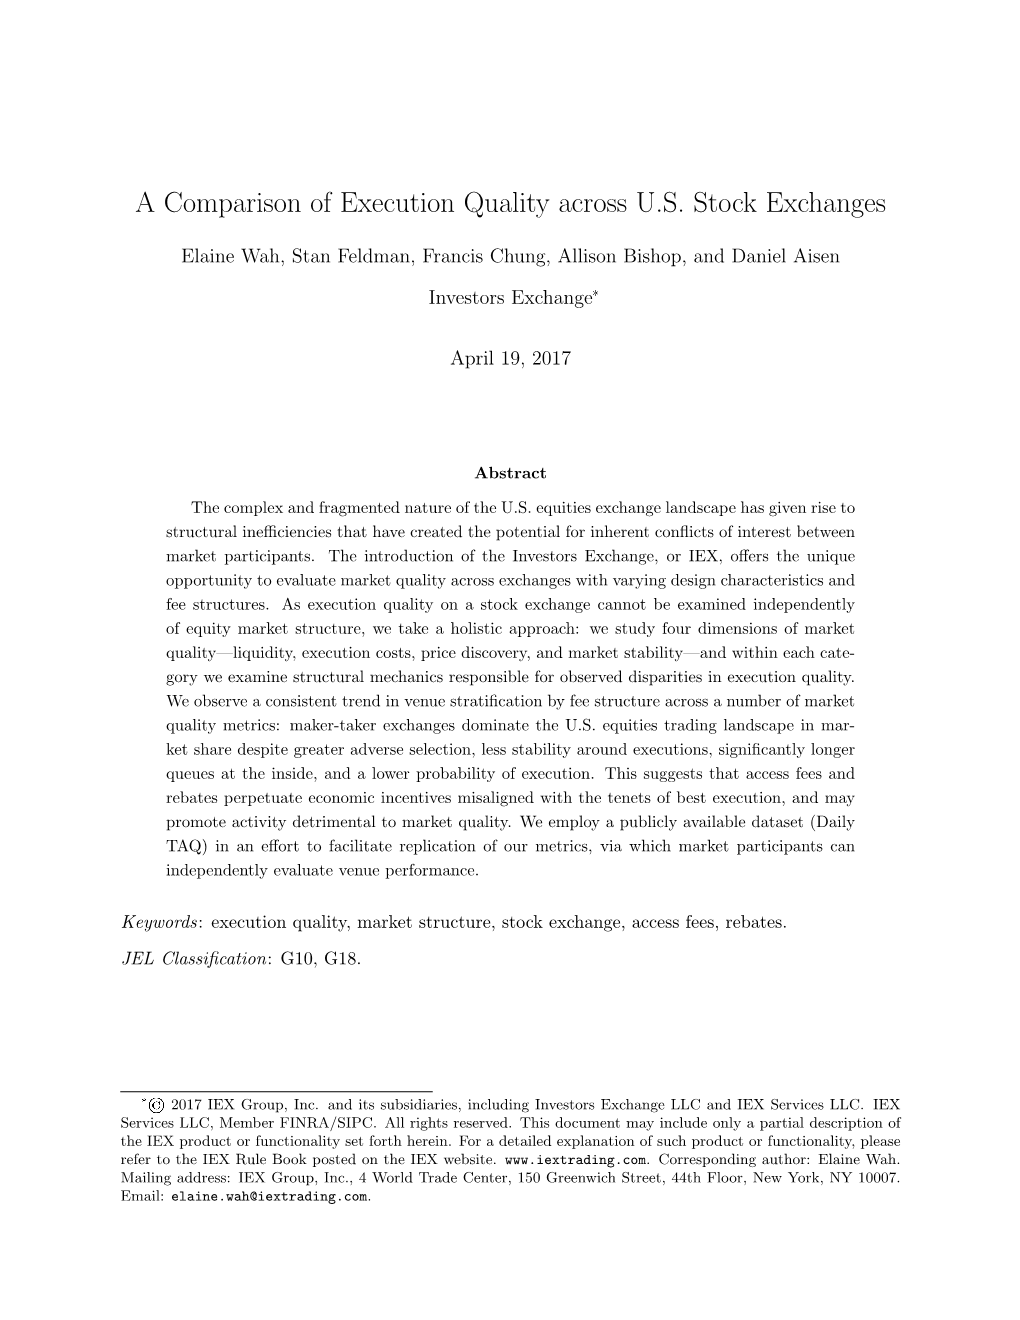 A Comparison of Execution Quality Across U.S. Stock Exchanges